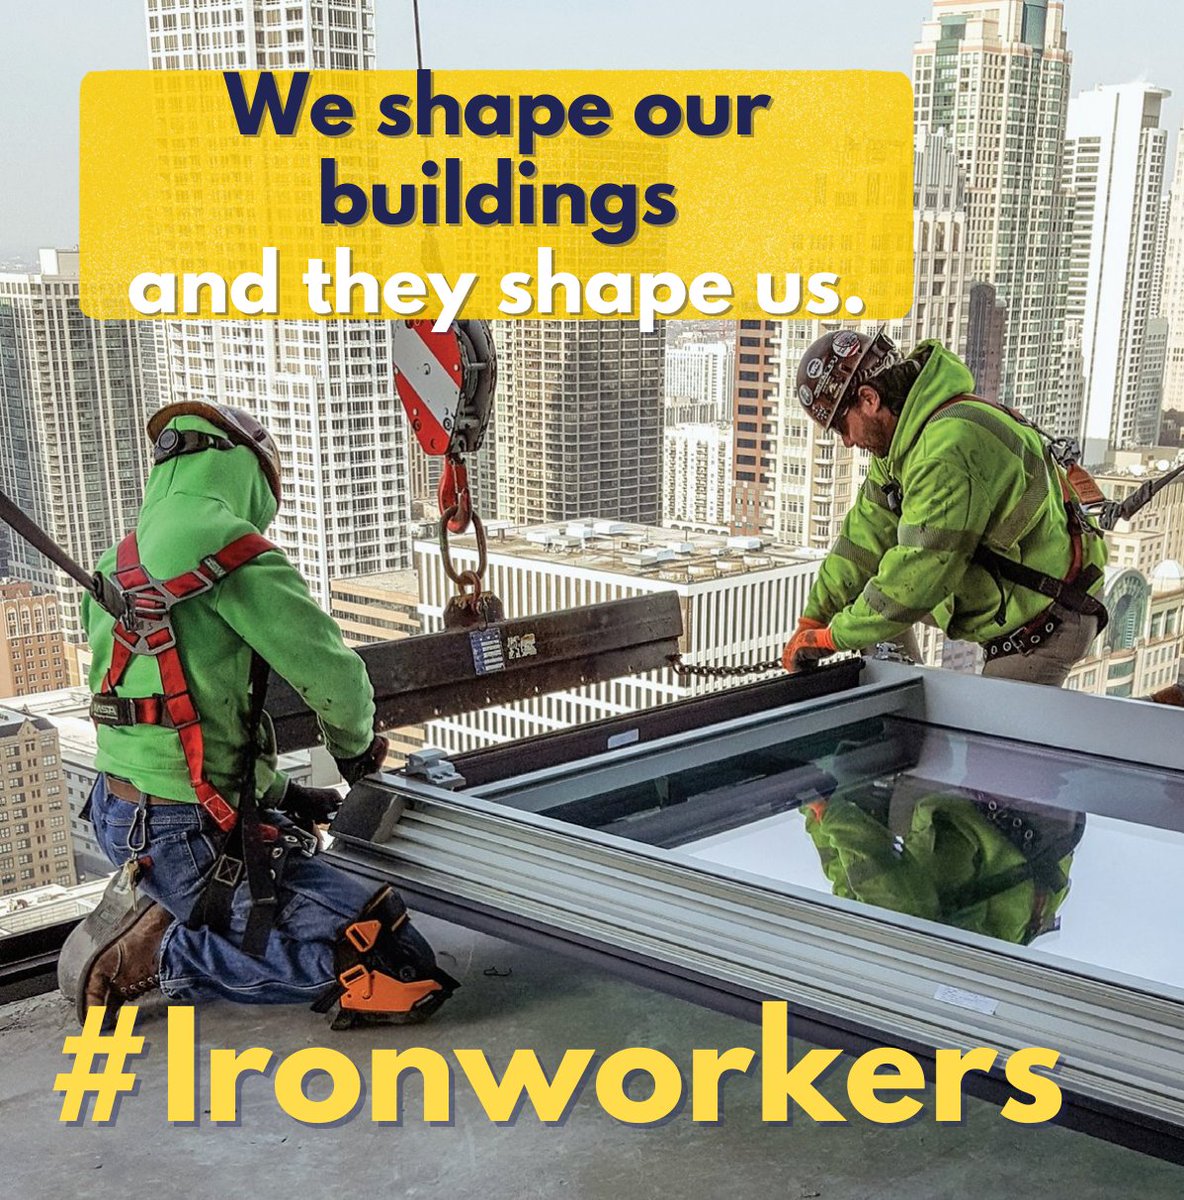 Ironworkers: building our nation one skyline at a time. 

#ironworkers #buildbig #highrise #ironworkernation